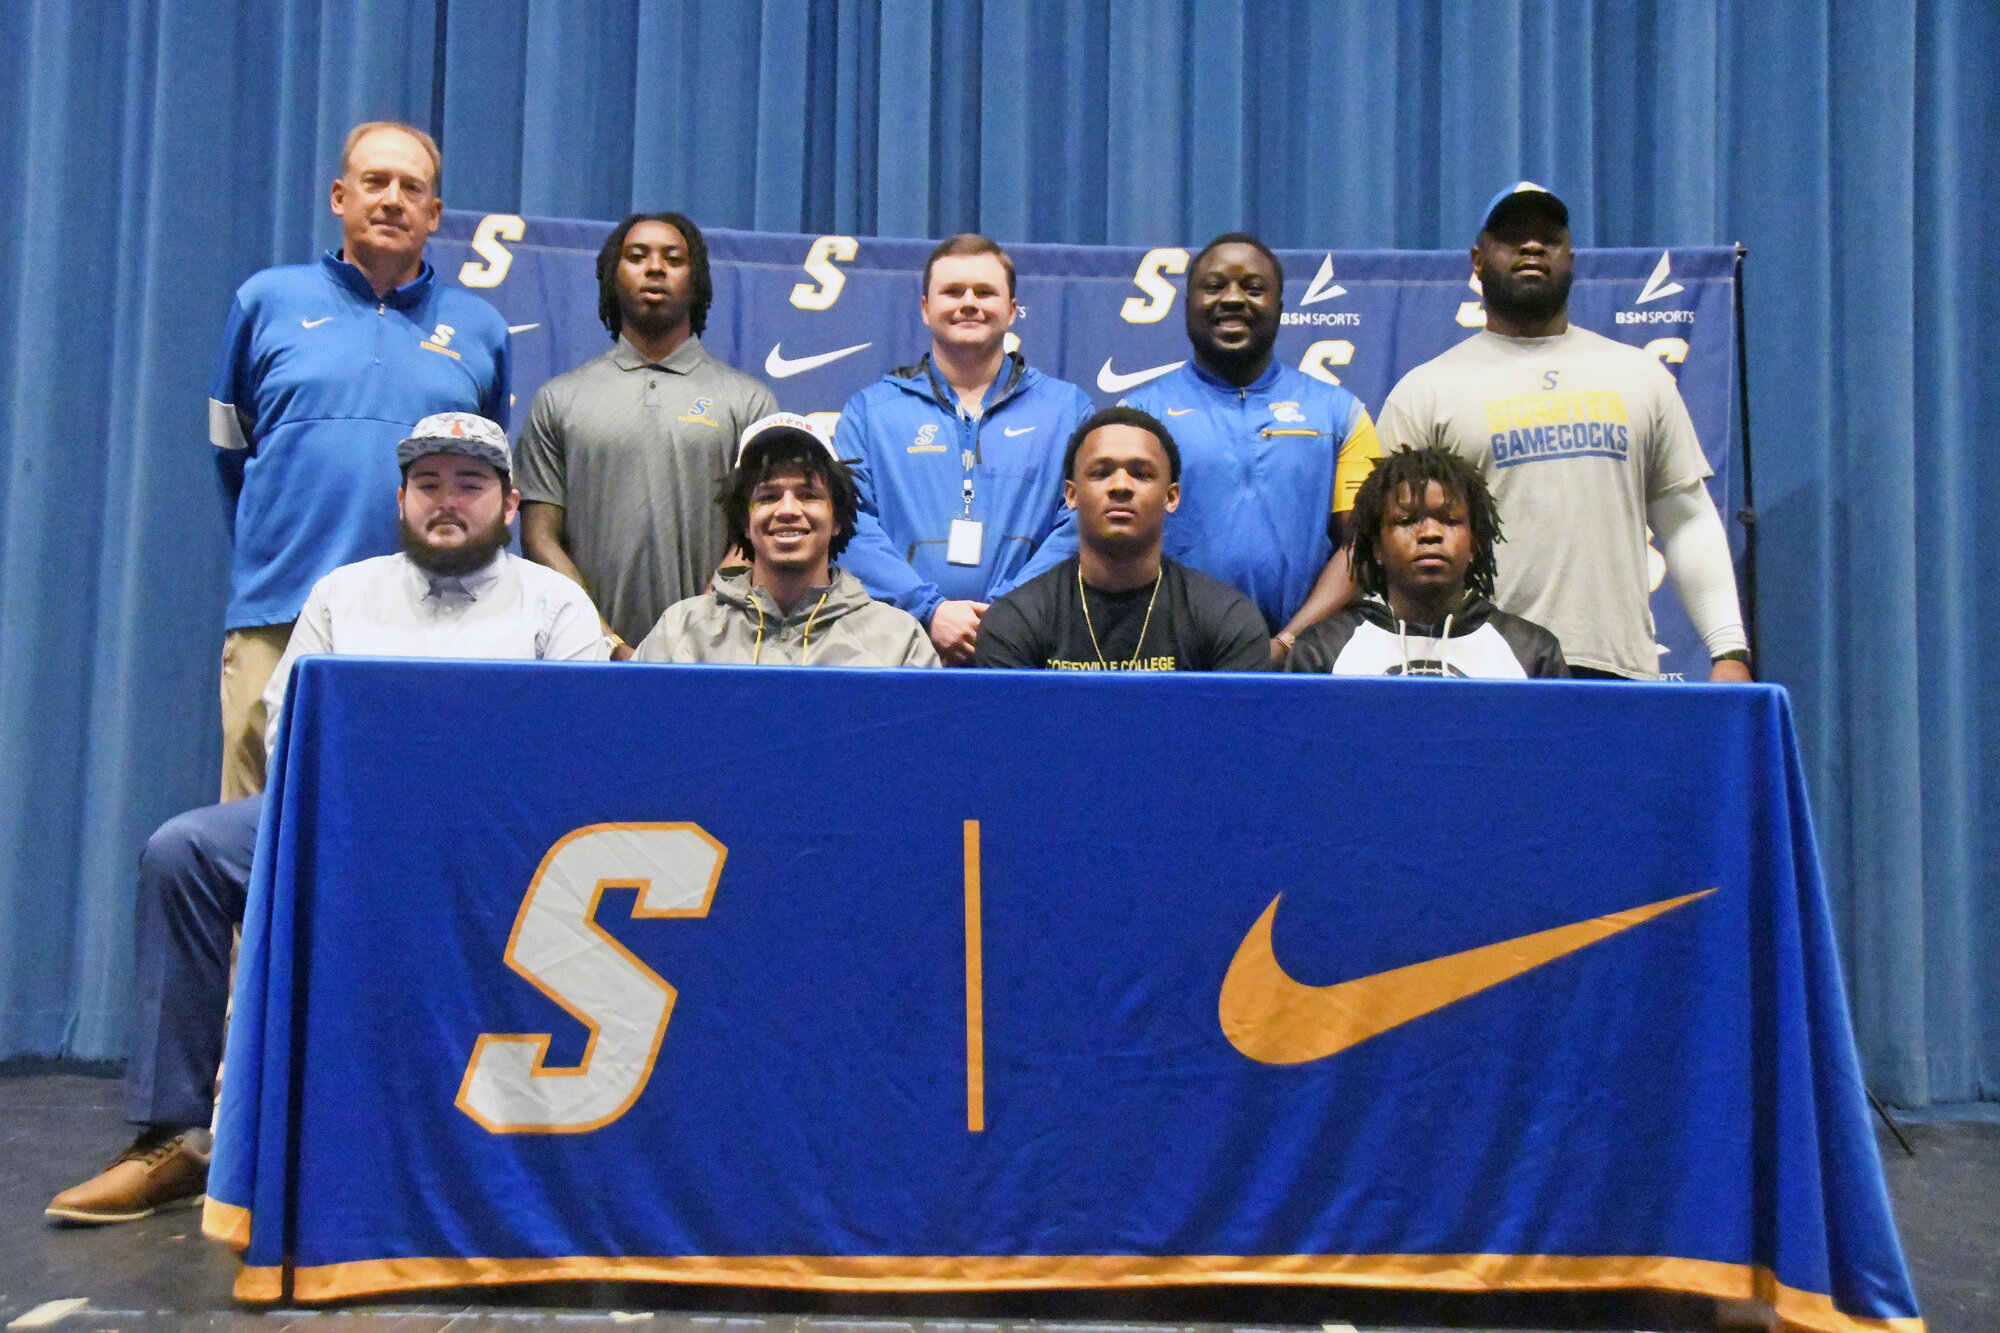 Seated, from left, Sumter High's Ashton Barr, Jamie Tedder Jr., AJ Bracey and Jauron Bennett are joined by Sumter High coaching staff after signing to continue their football careers.